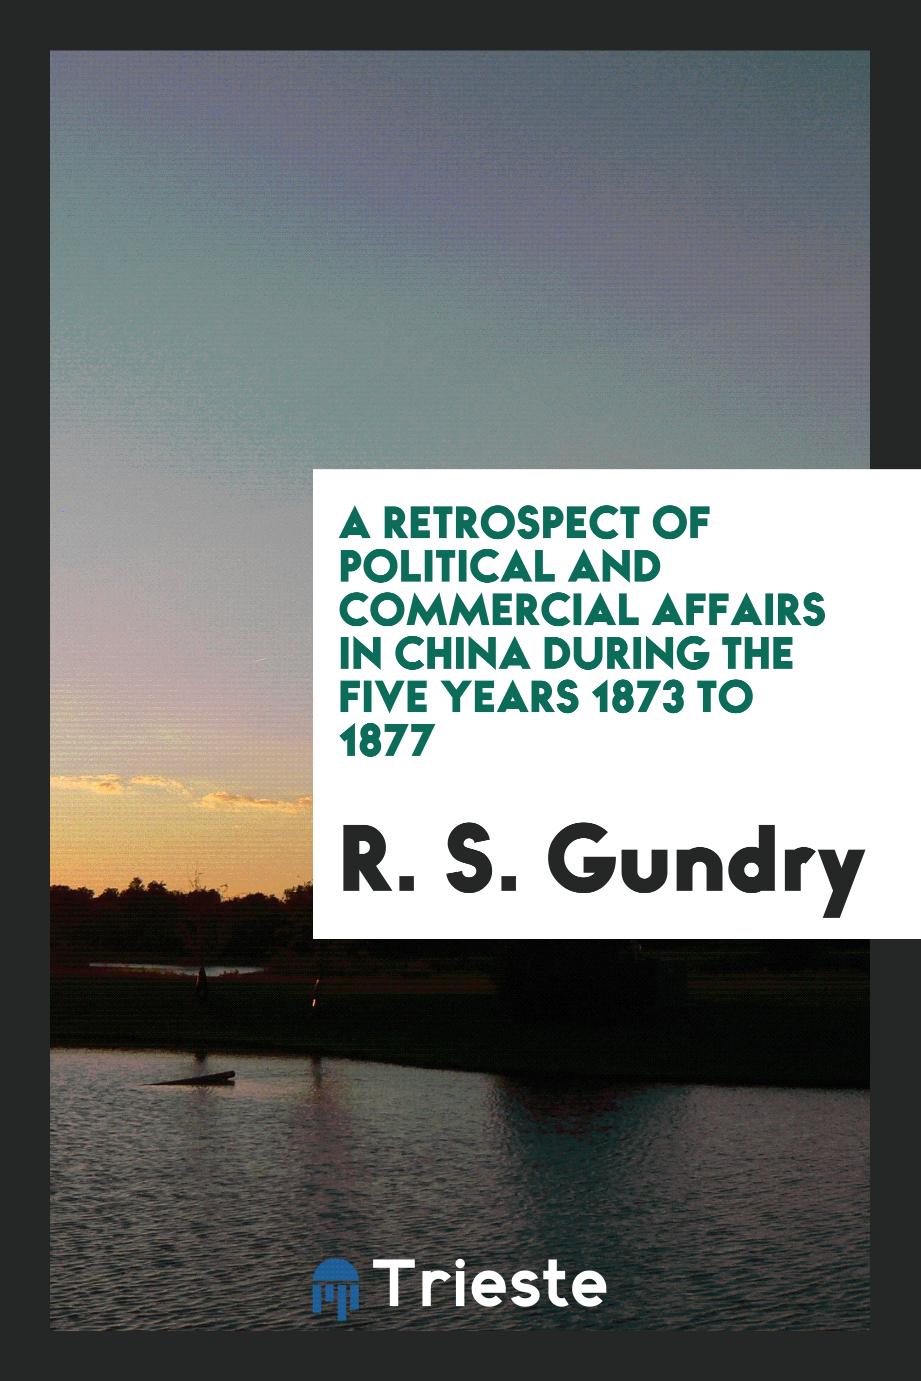 A Retrospect of Political and Commercial Affairs in China During the Five Years 1873 to 1877